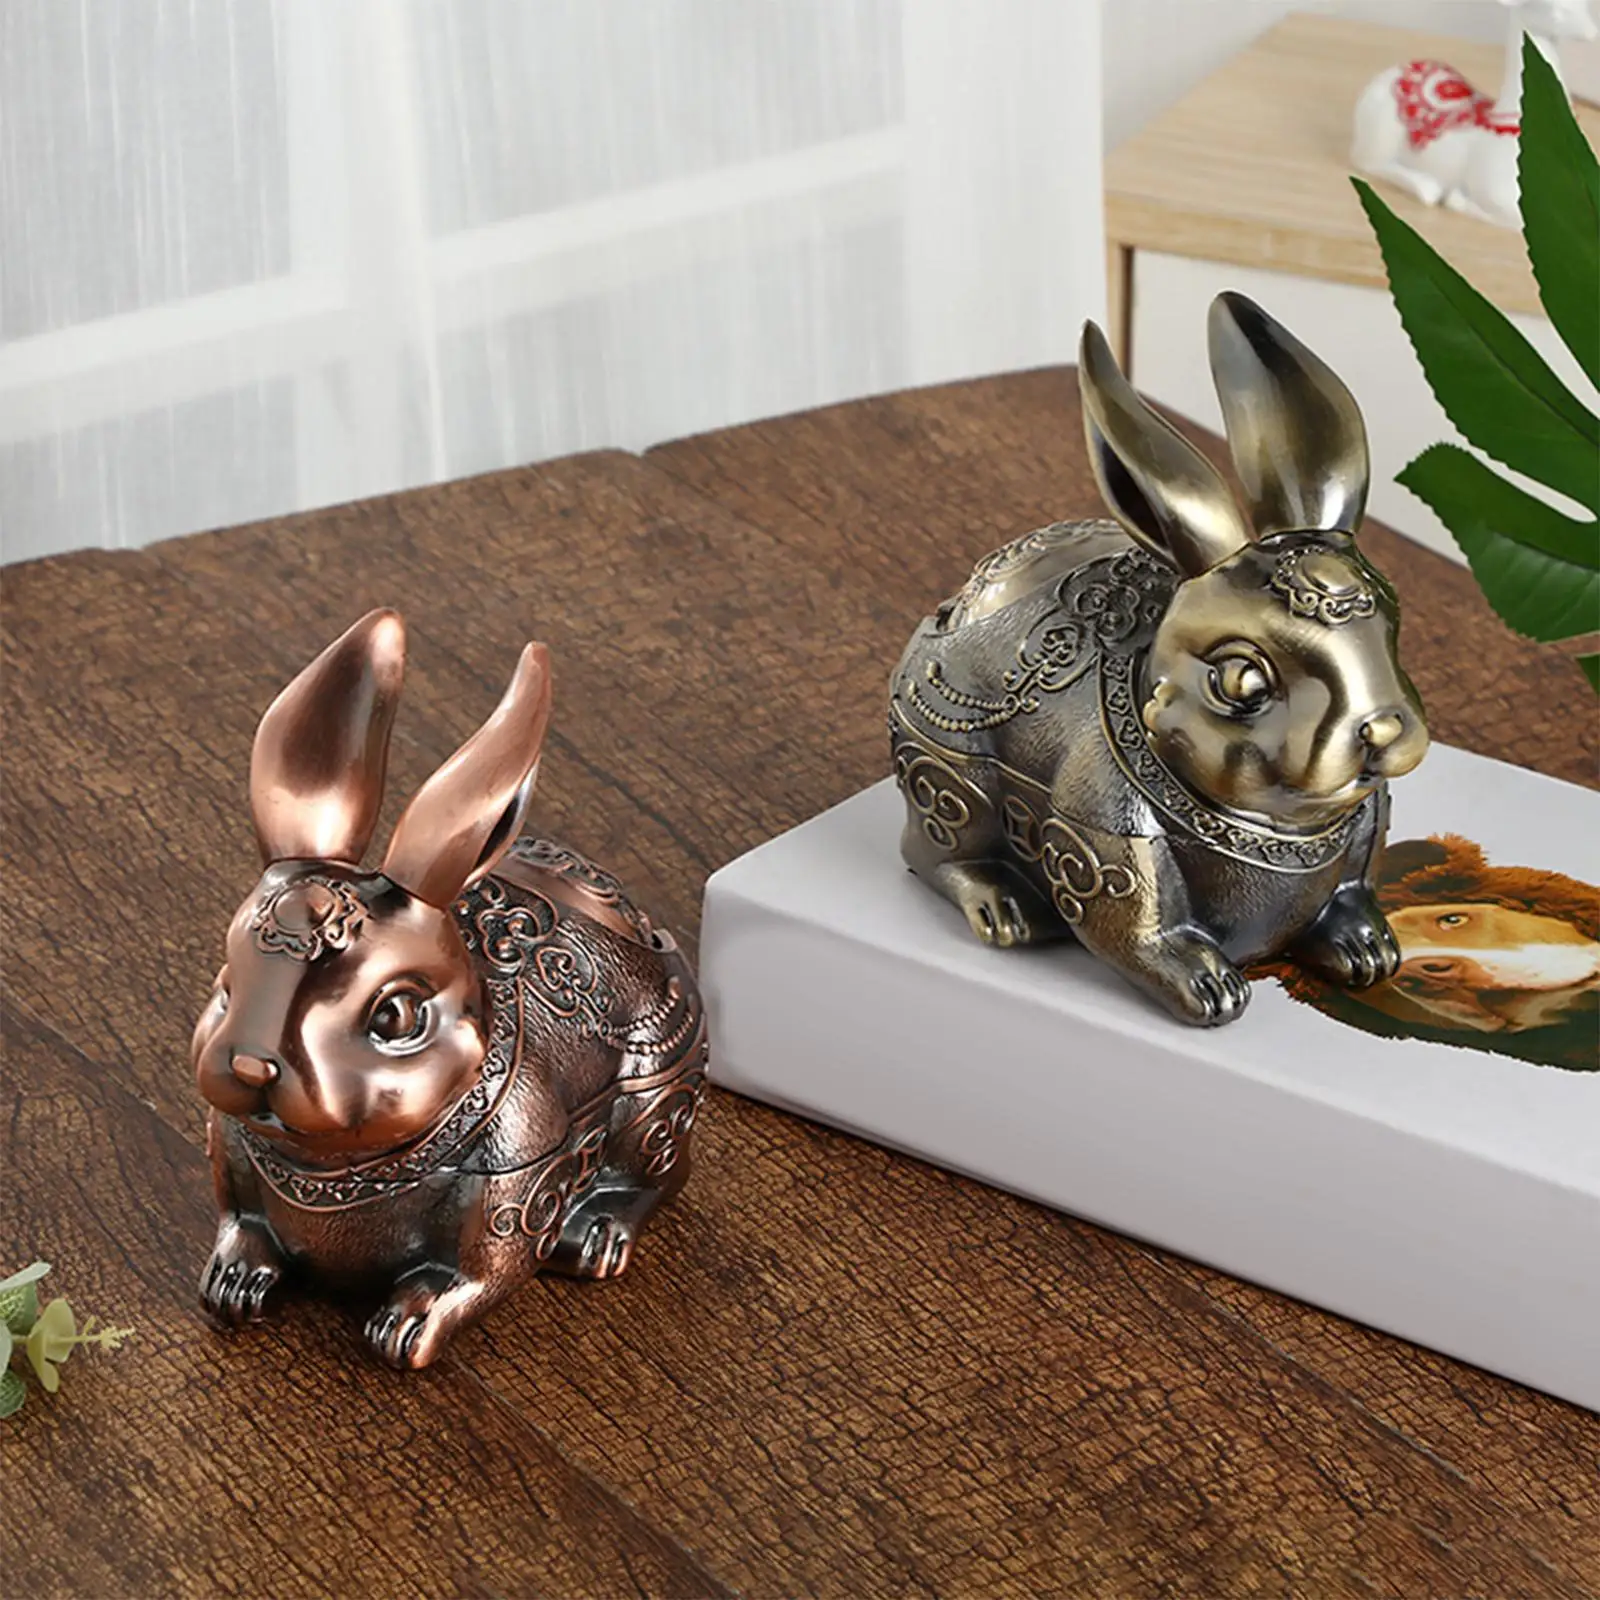 Ashtray Holder Decor Ornaments Rabbit Statue for Bedroom, Home, Decoration Ornament Holiday Gifts